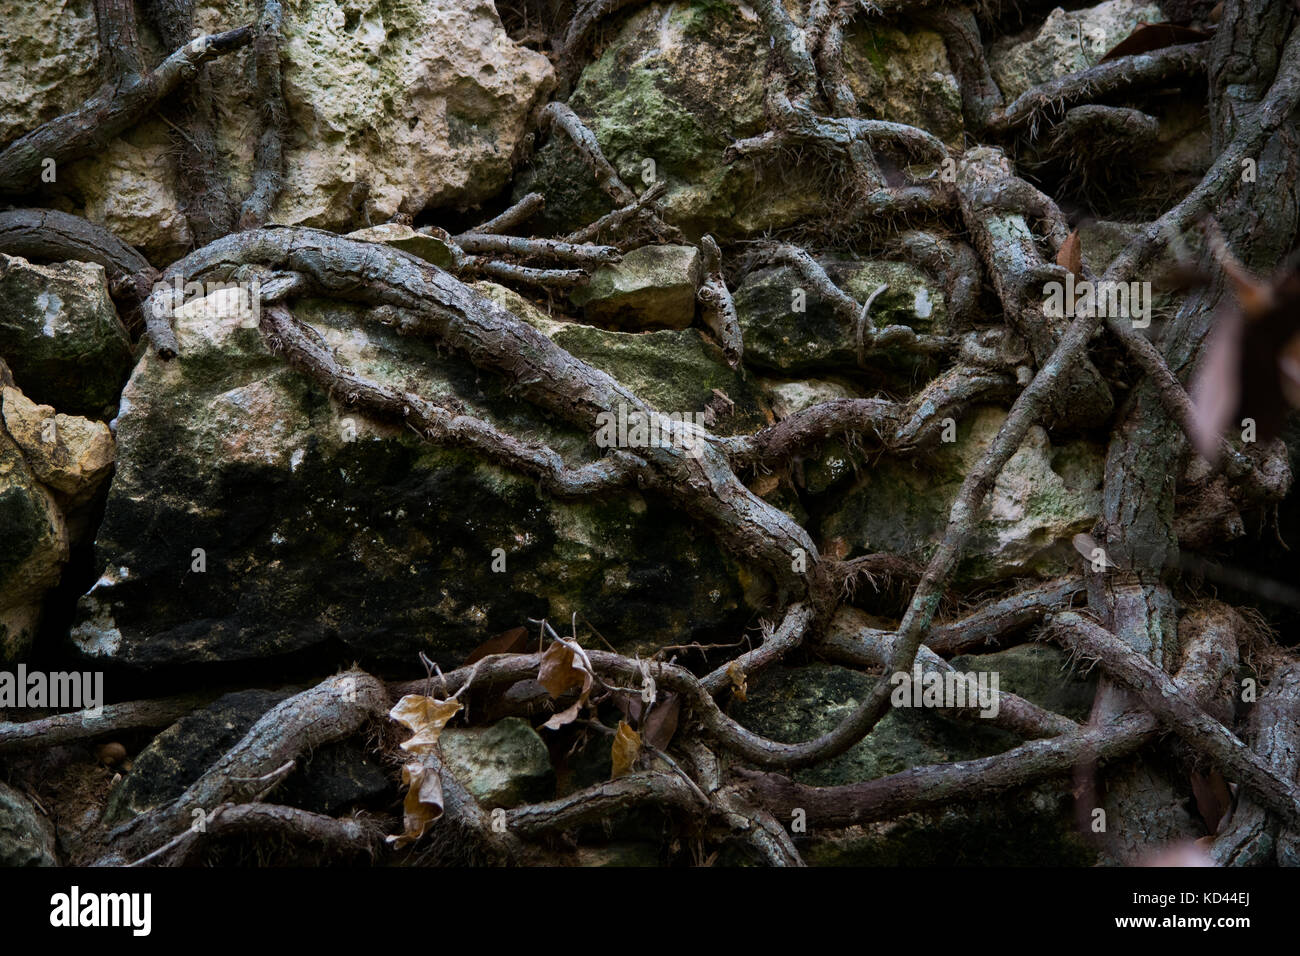 The roots of a tree making their way through the uneven stones of a rubble wall in the Buskett woodland in Malta, wall appears haunting, mysterious Stock Photo